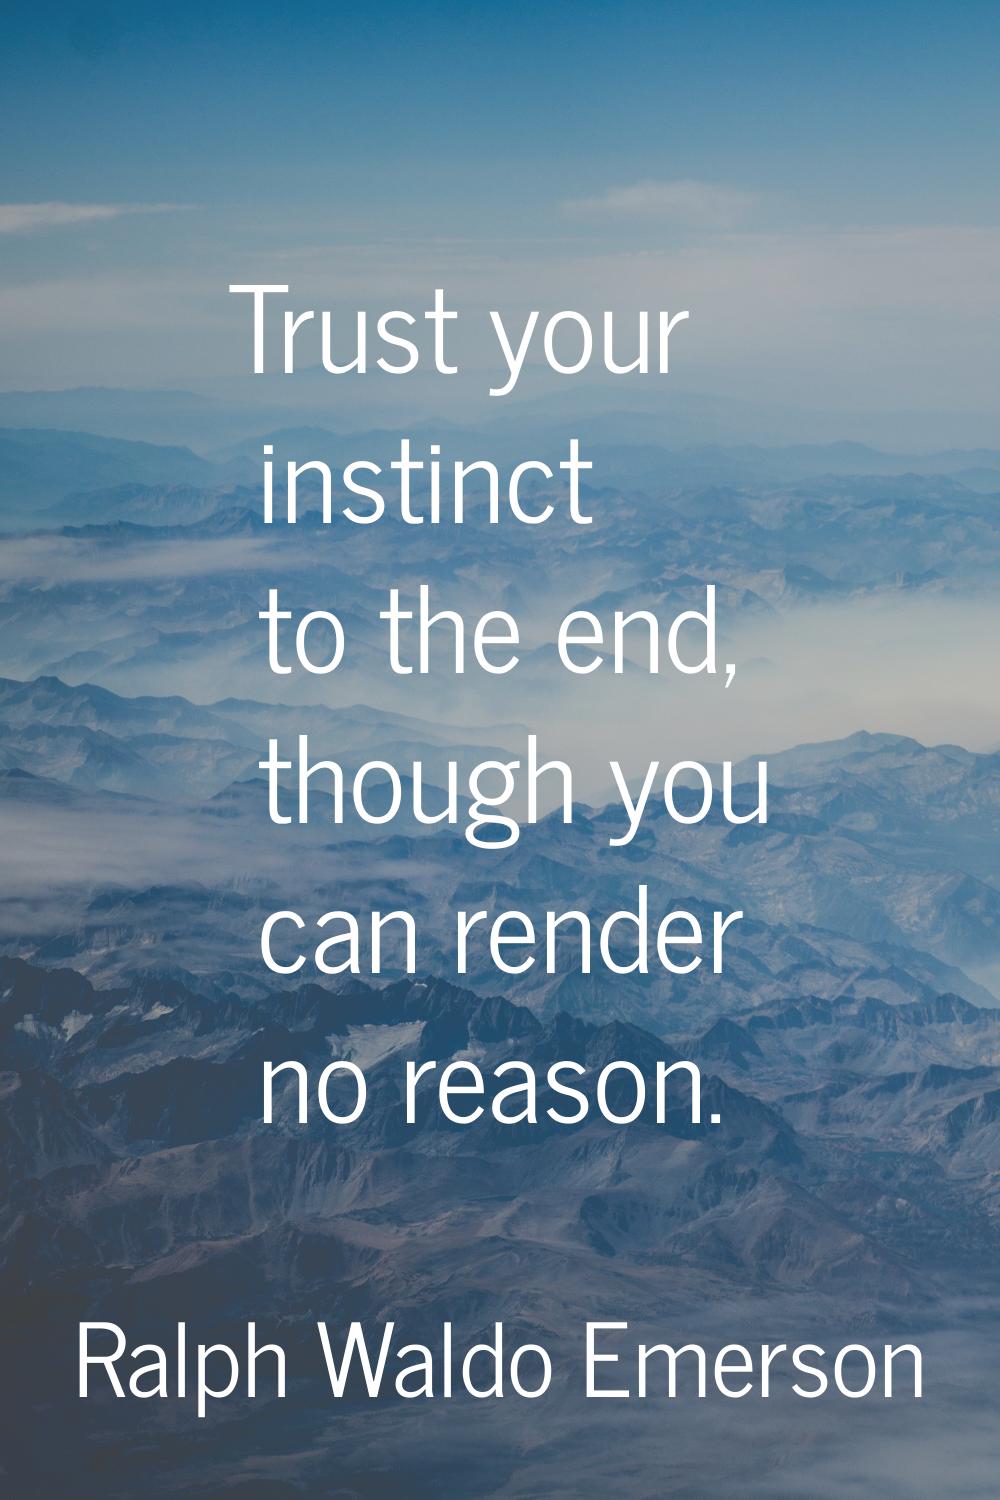 Trust your instinct to the end, though you can render no reason.